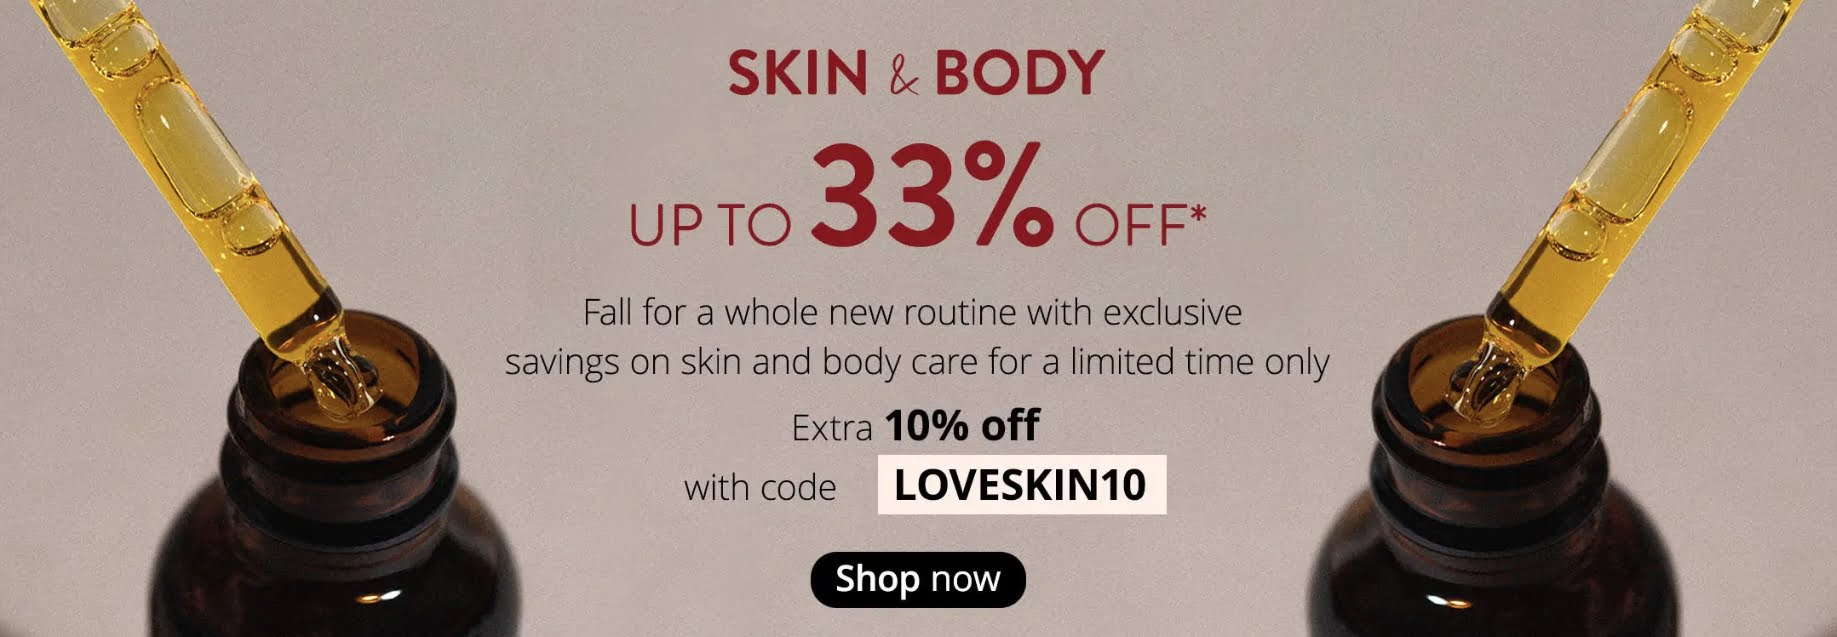 Up to 33% off Skin & Body at Feelunique EU